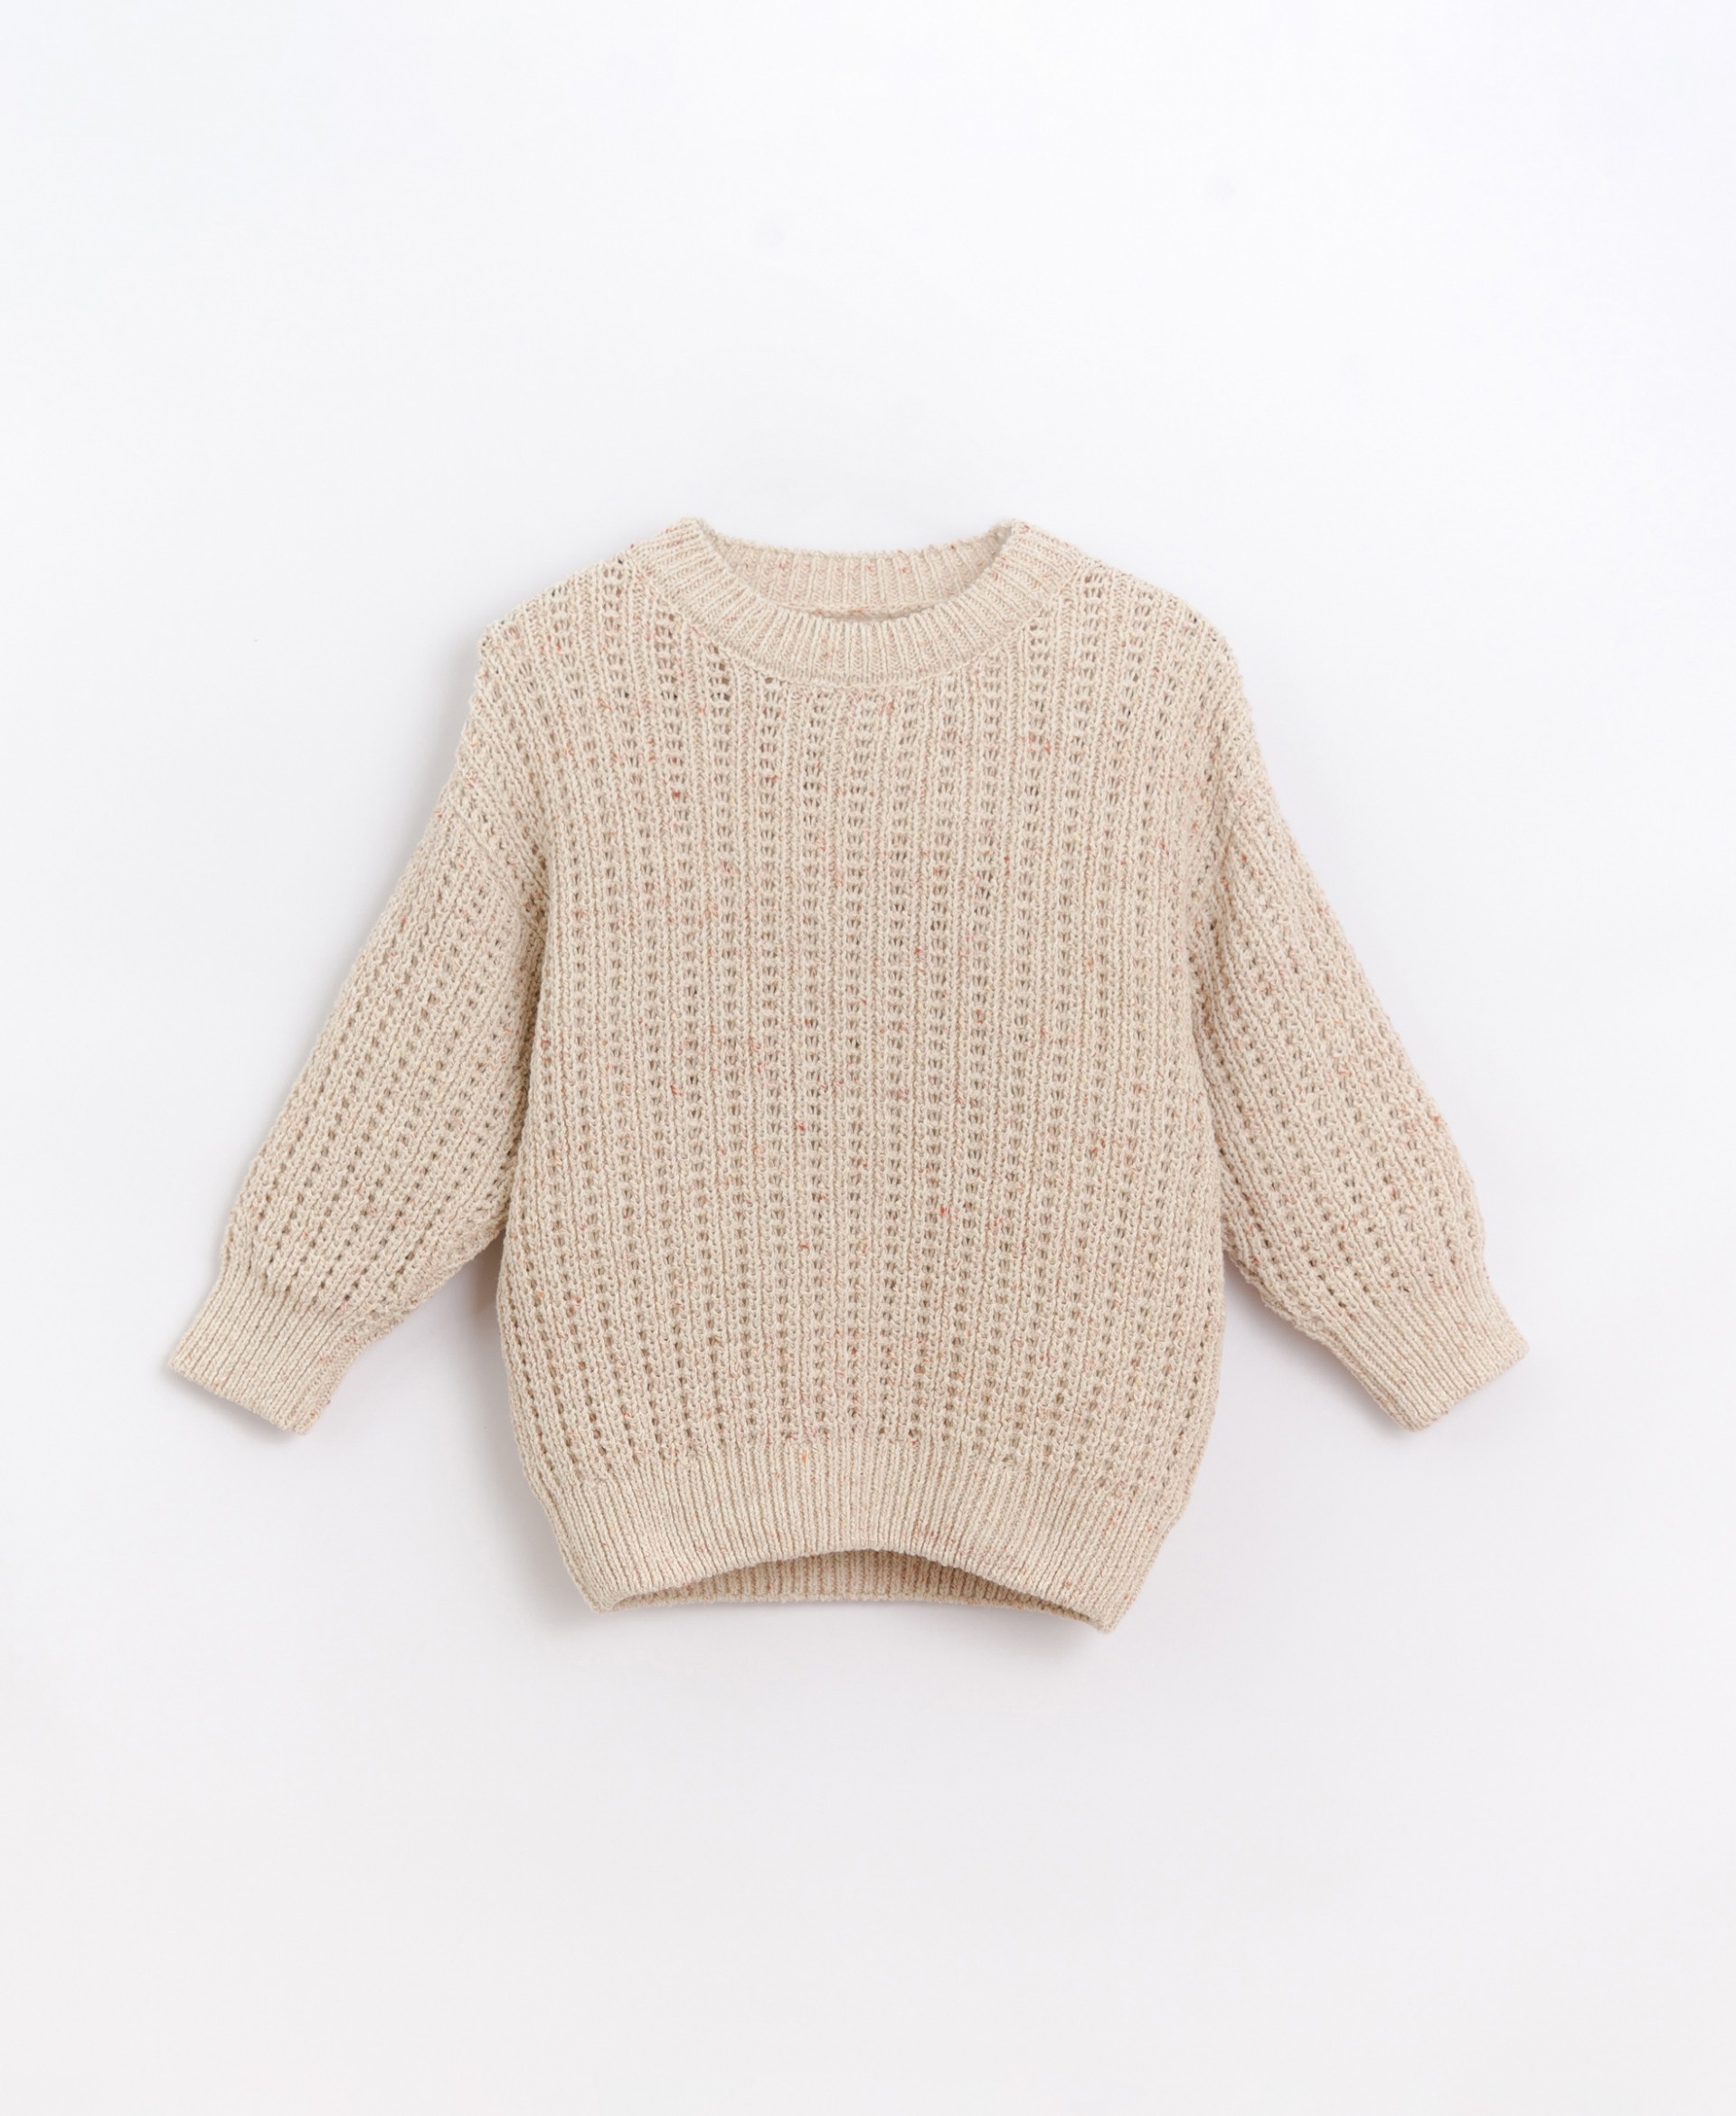 Knitted sweater | Basketry